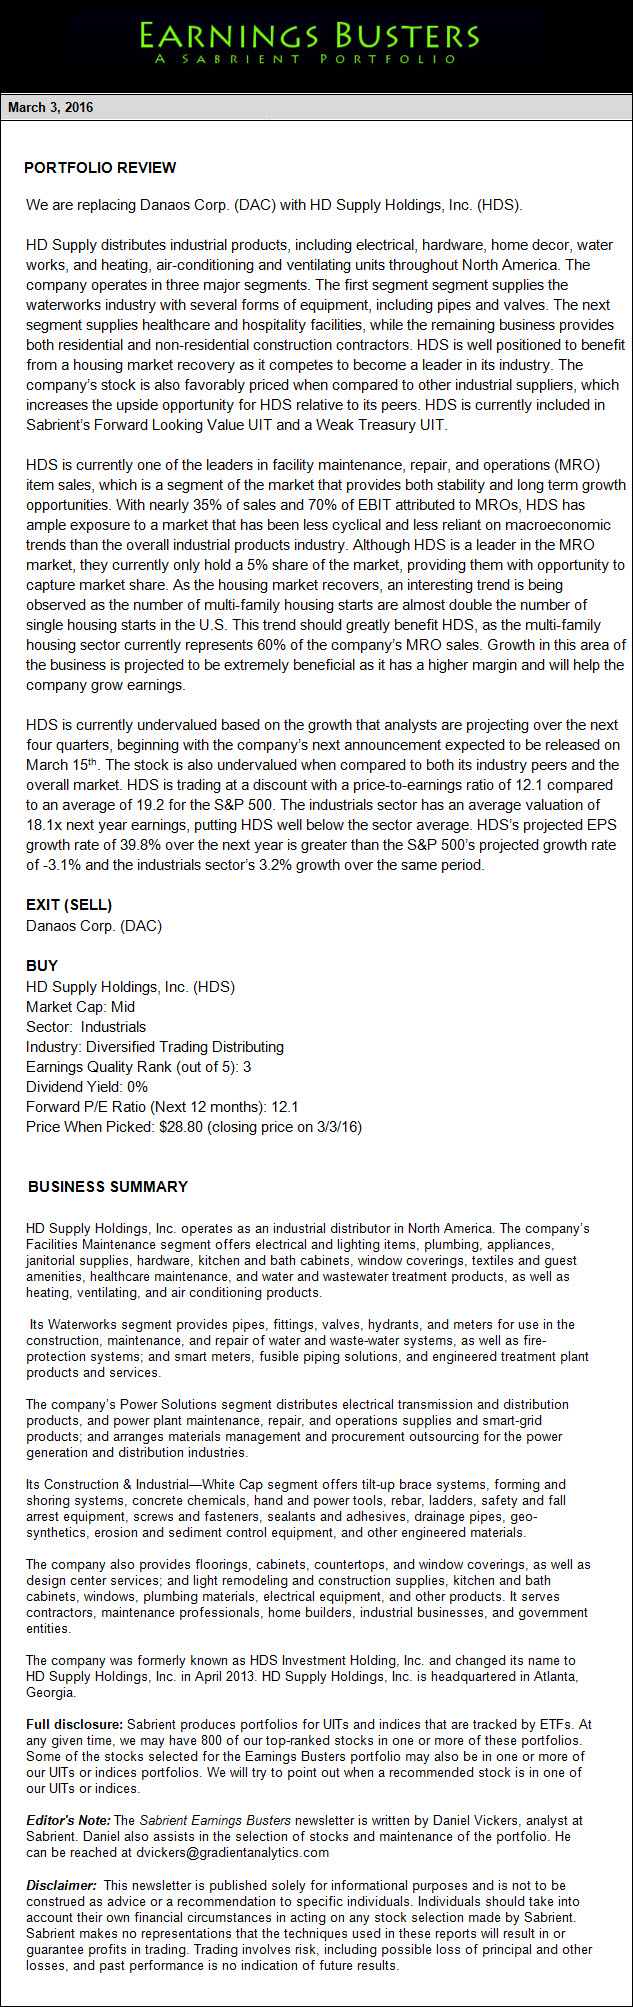 Earnings Busters Newsletter - March 3, 2016